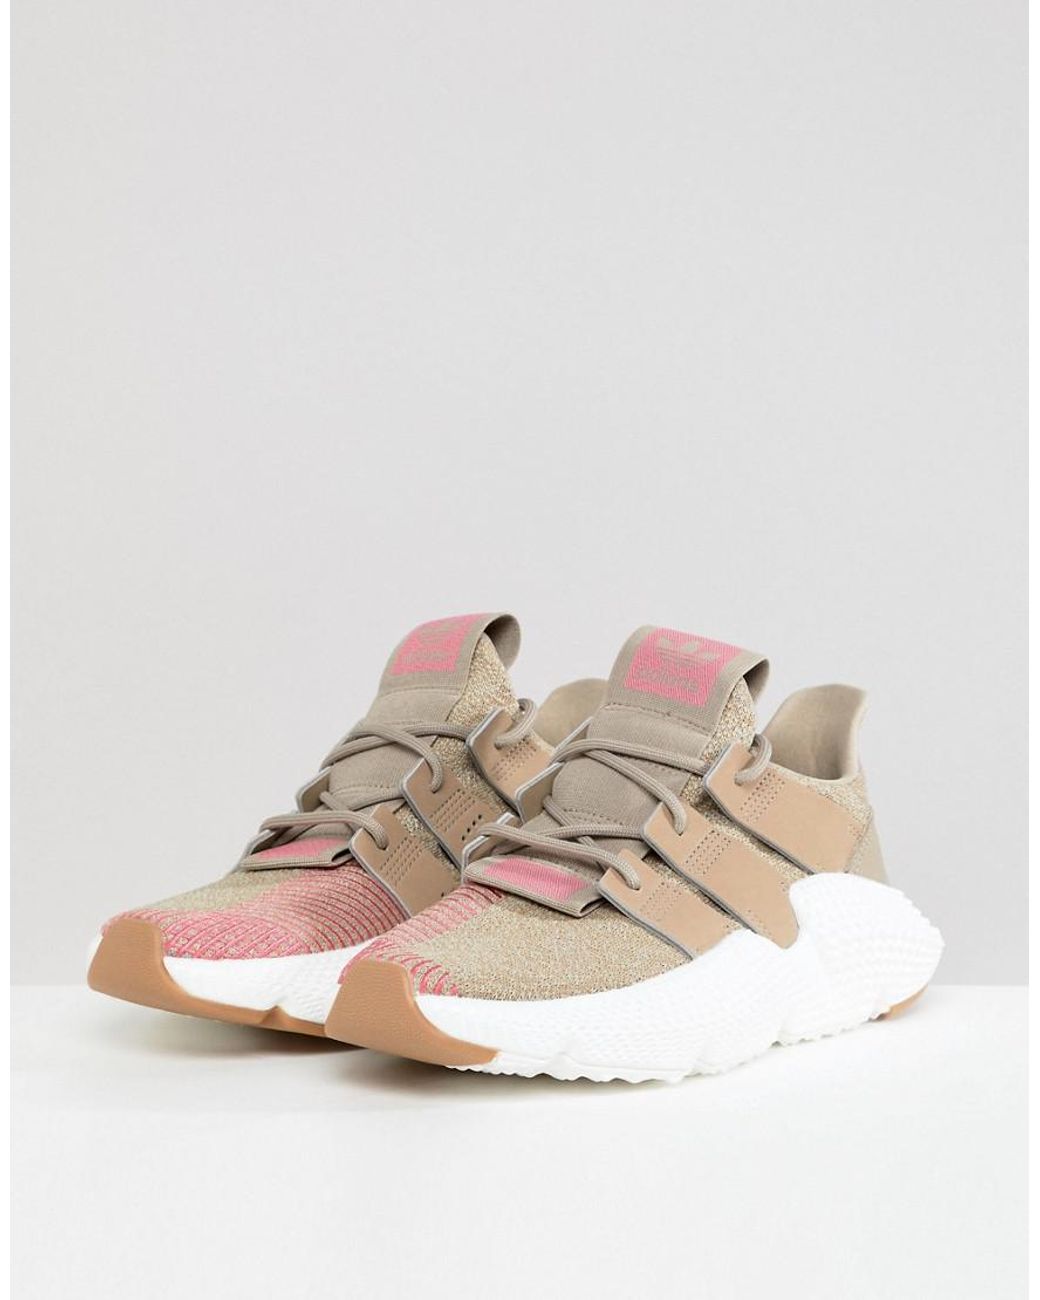 adidas Originals Prophere Trainers In Beige And Pink in Natural | Lyst